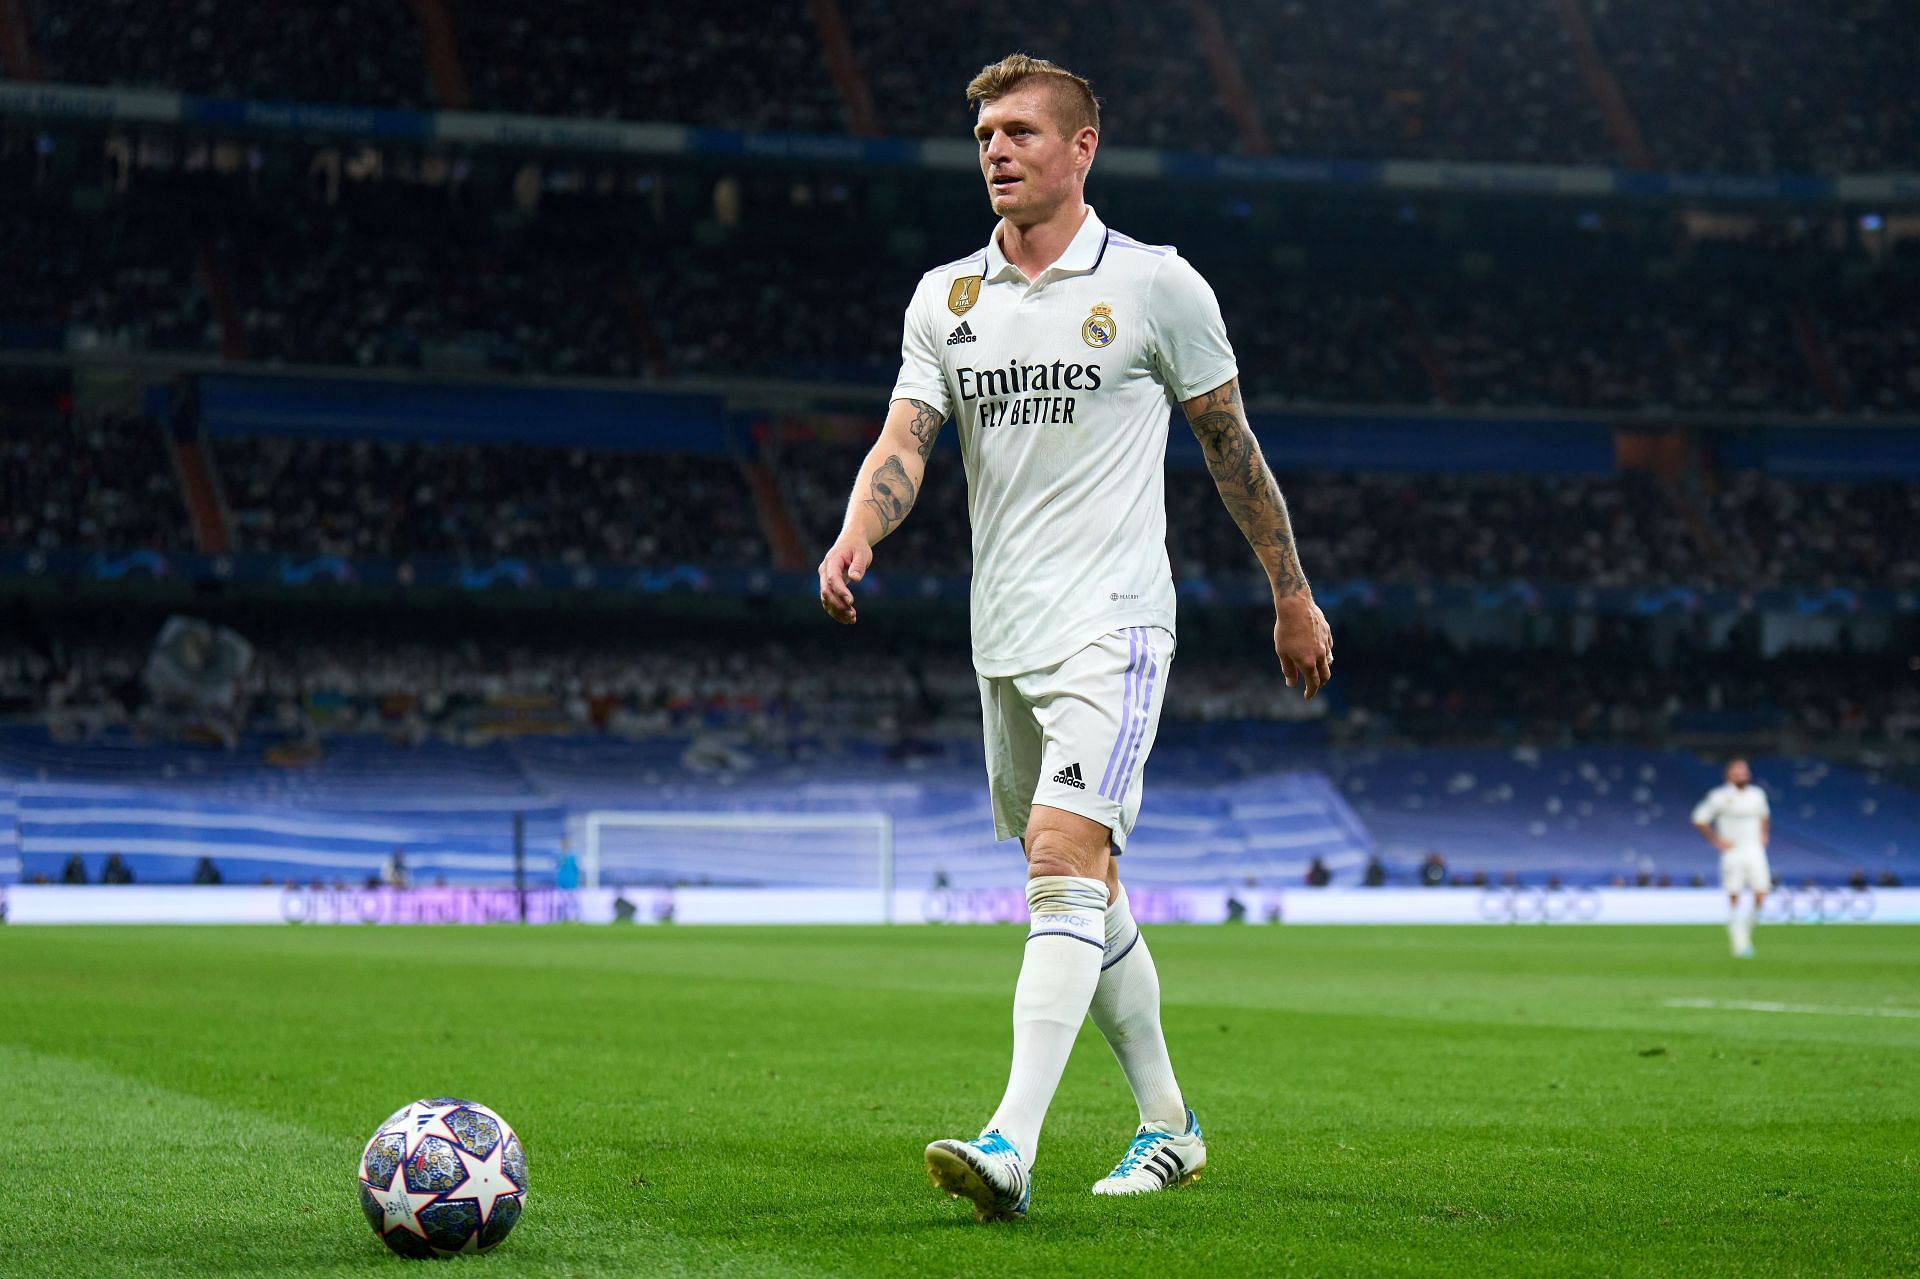 Toni Kroos has been playing alongside Luka Modric for almost a decade.